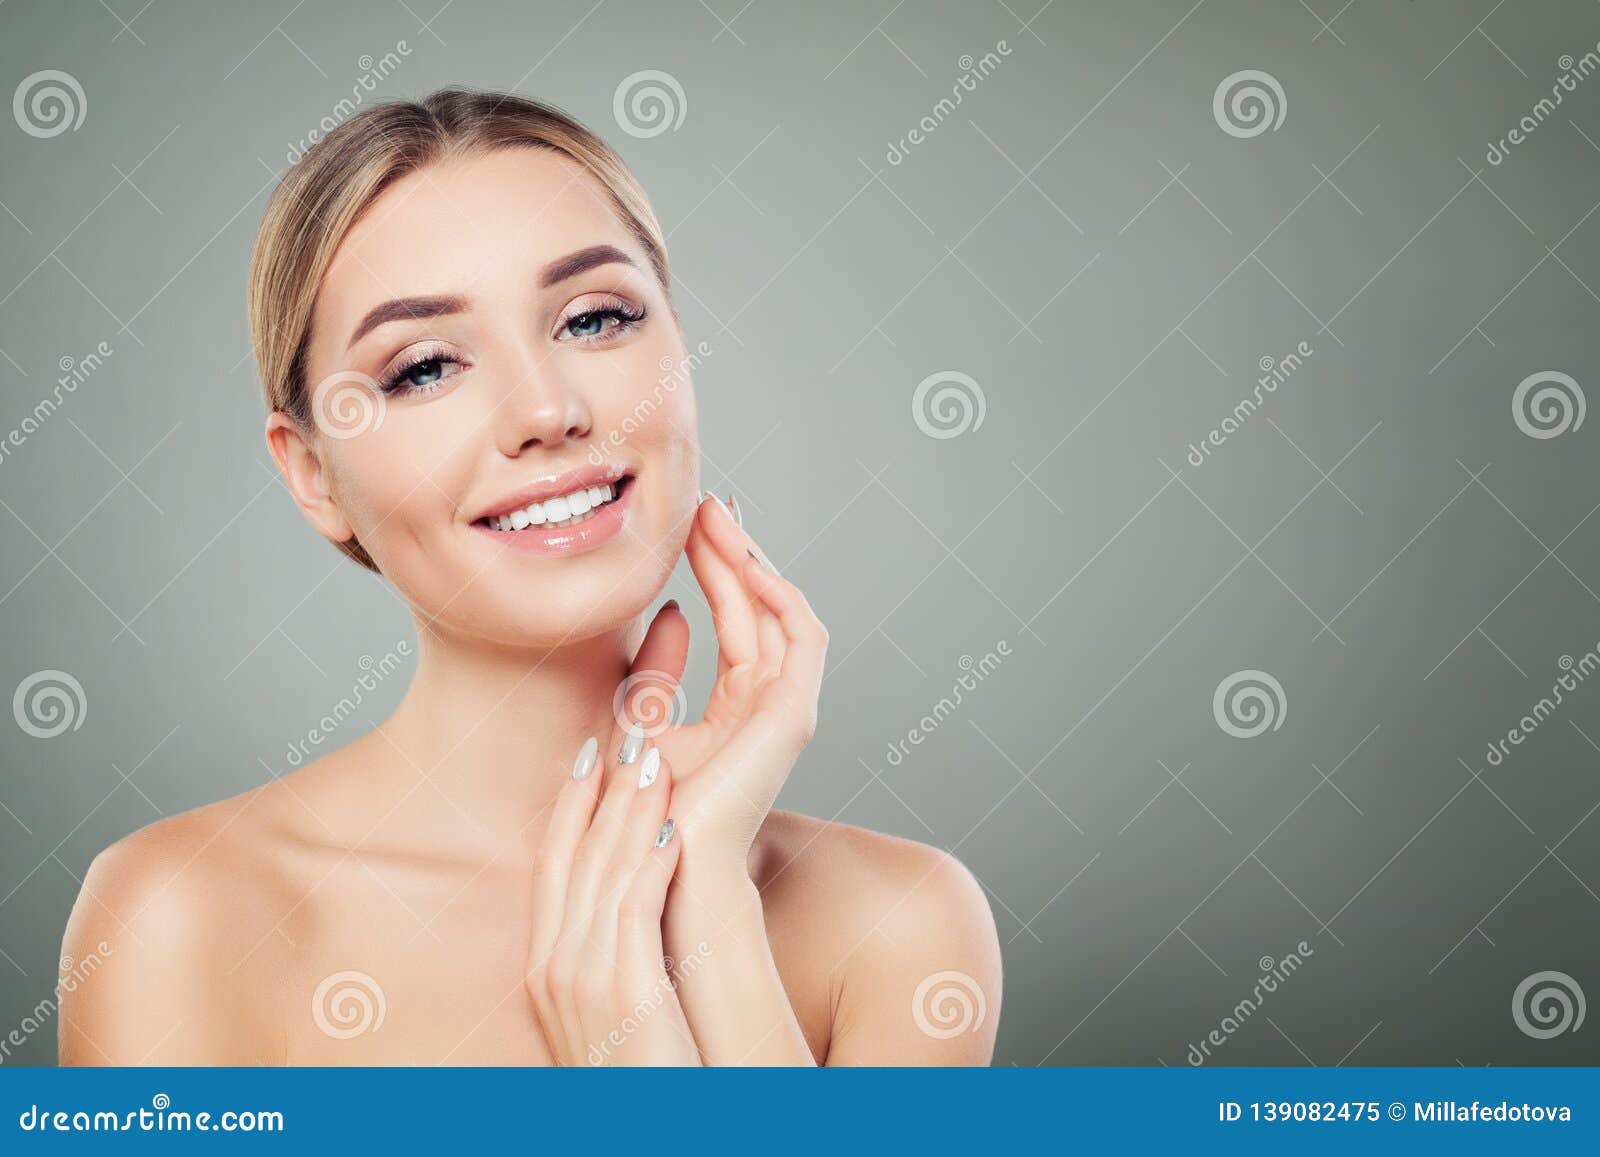 beautiful woman smiling and touching her hand her face. cute girl with clear skin. facial treatment, face lifting and cosmetology